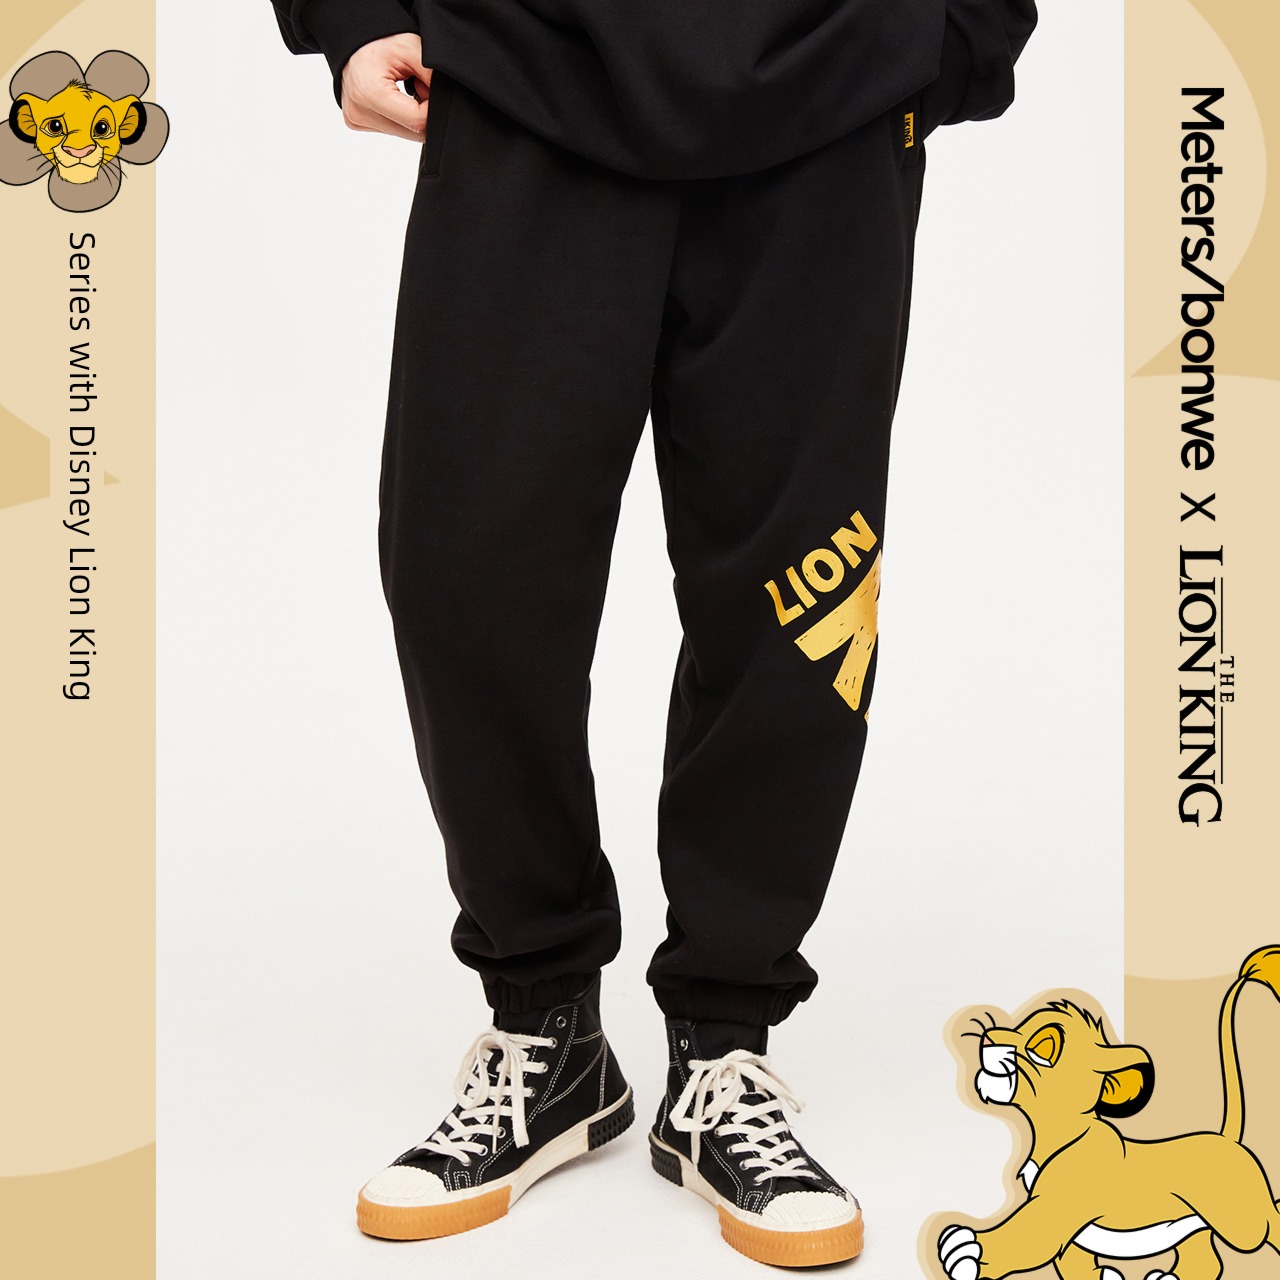 Mets bonway Disney's The Lion King jointly leisure time Sports pants